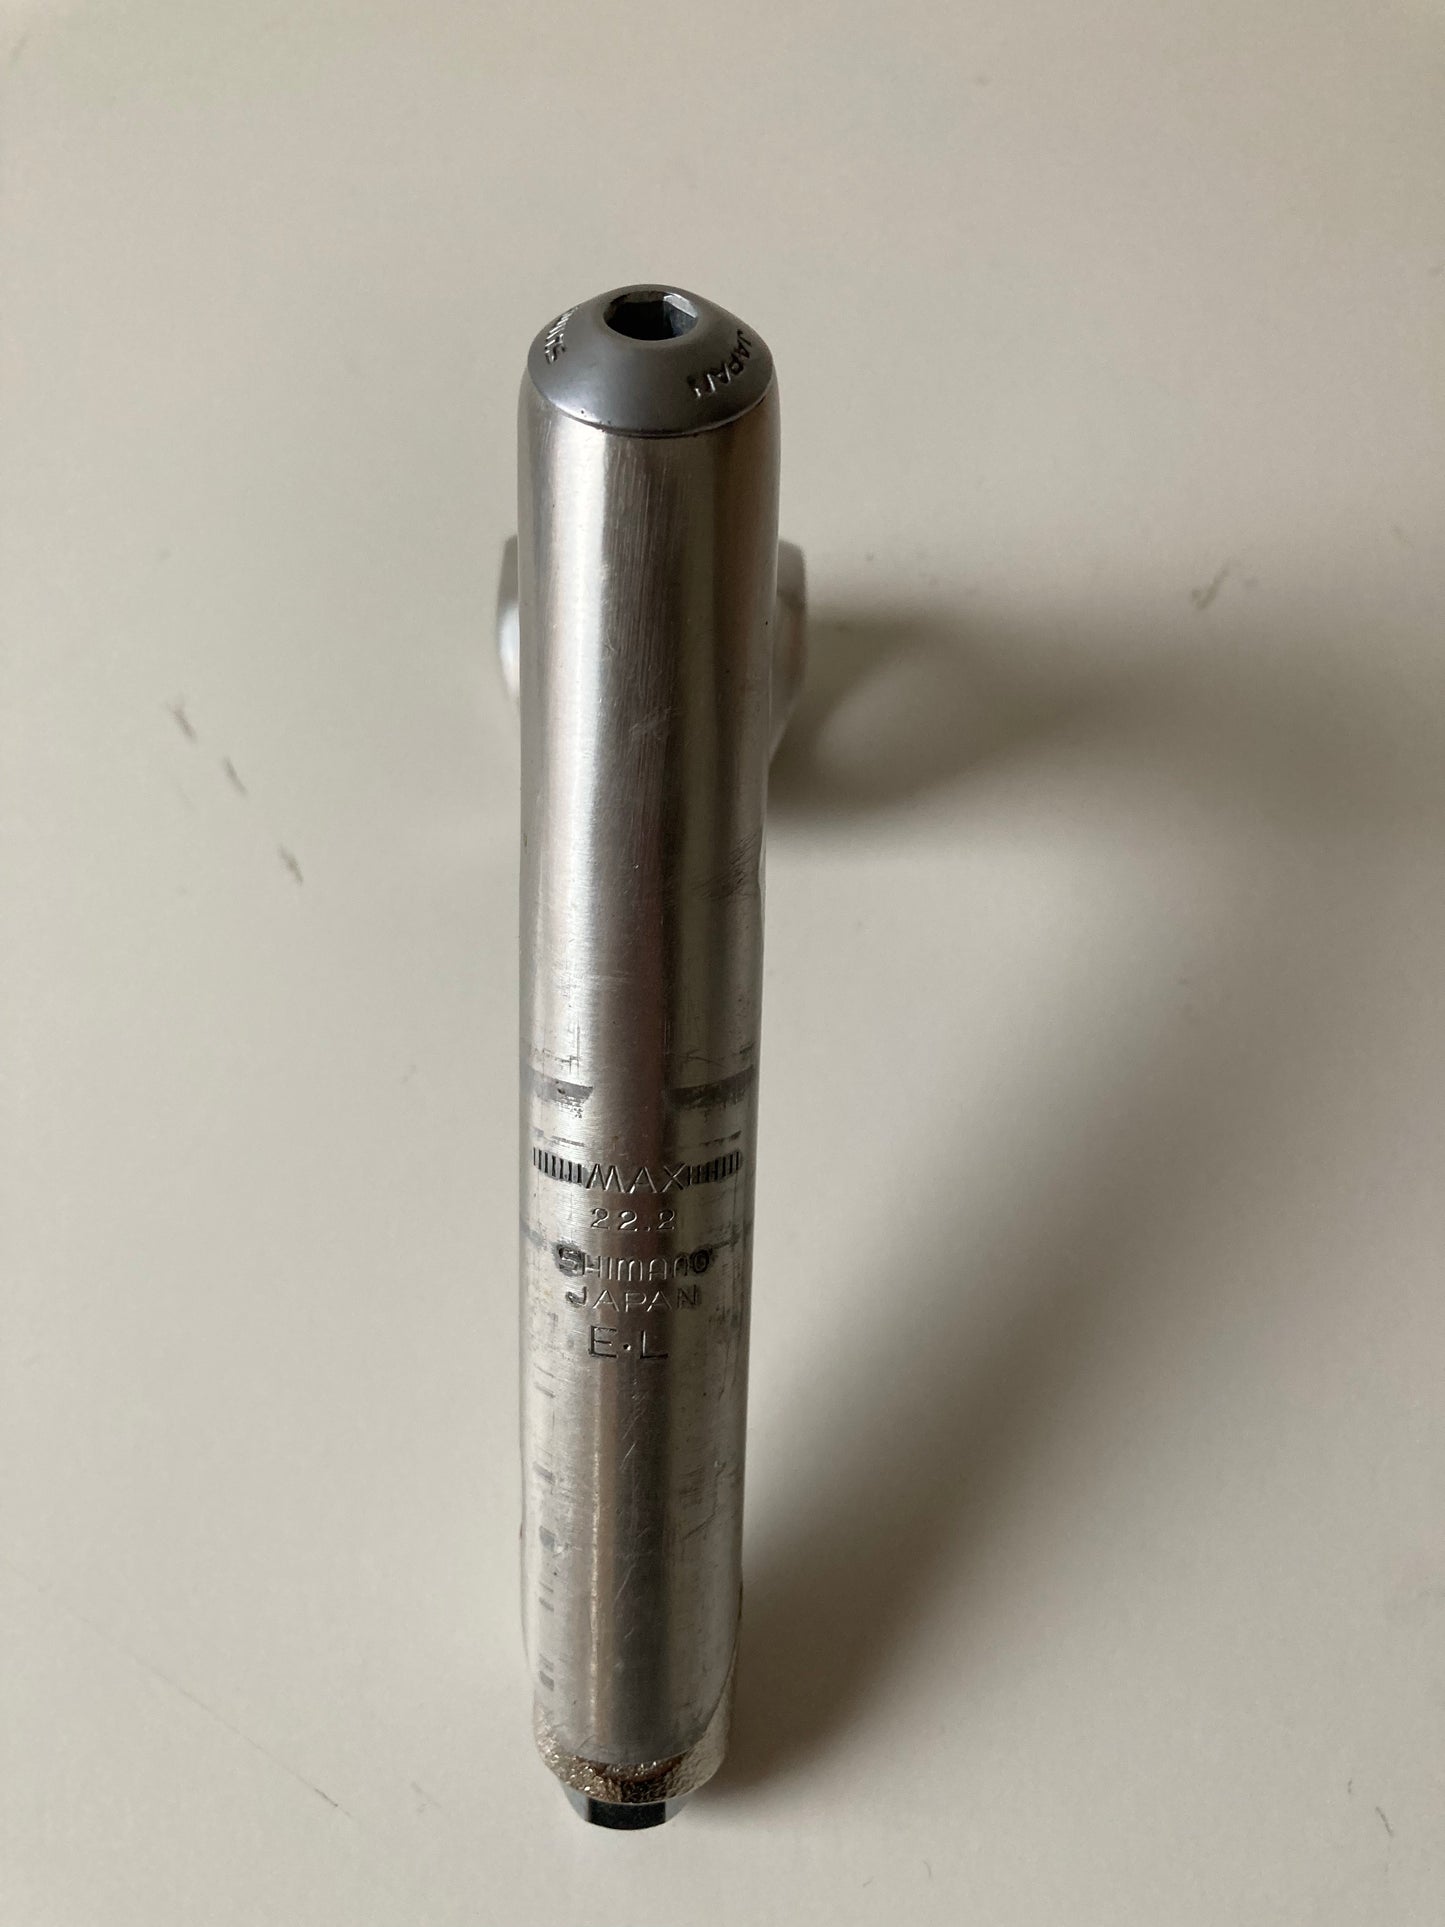 Shimano 600 AX quill stem 1”